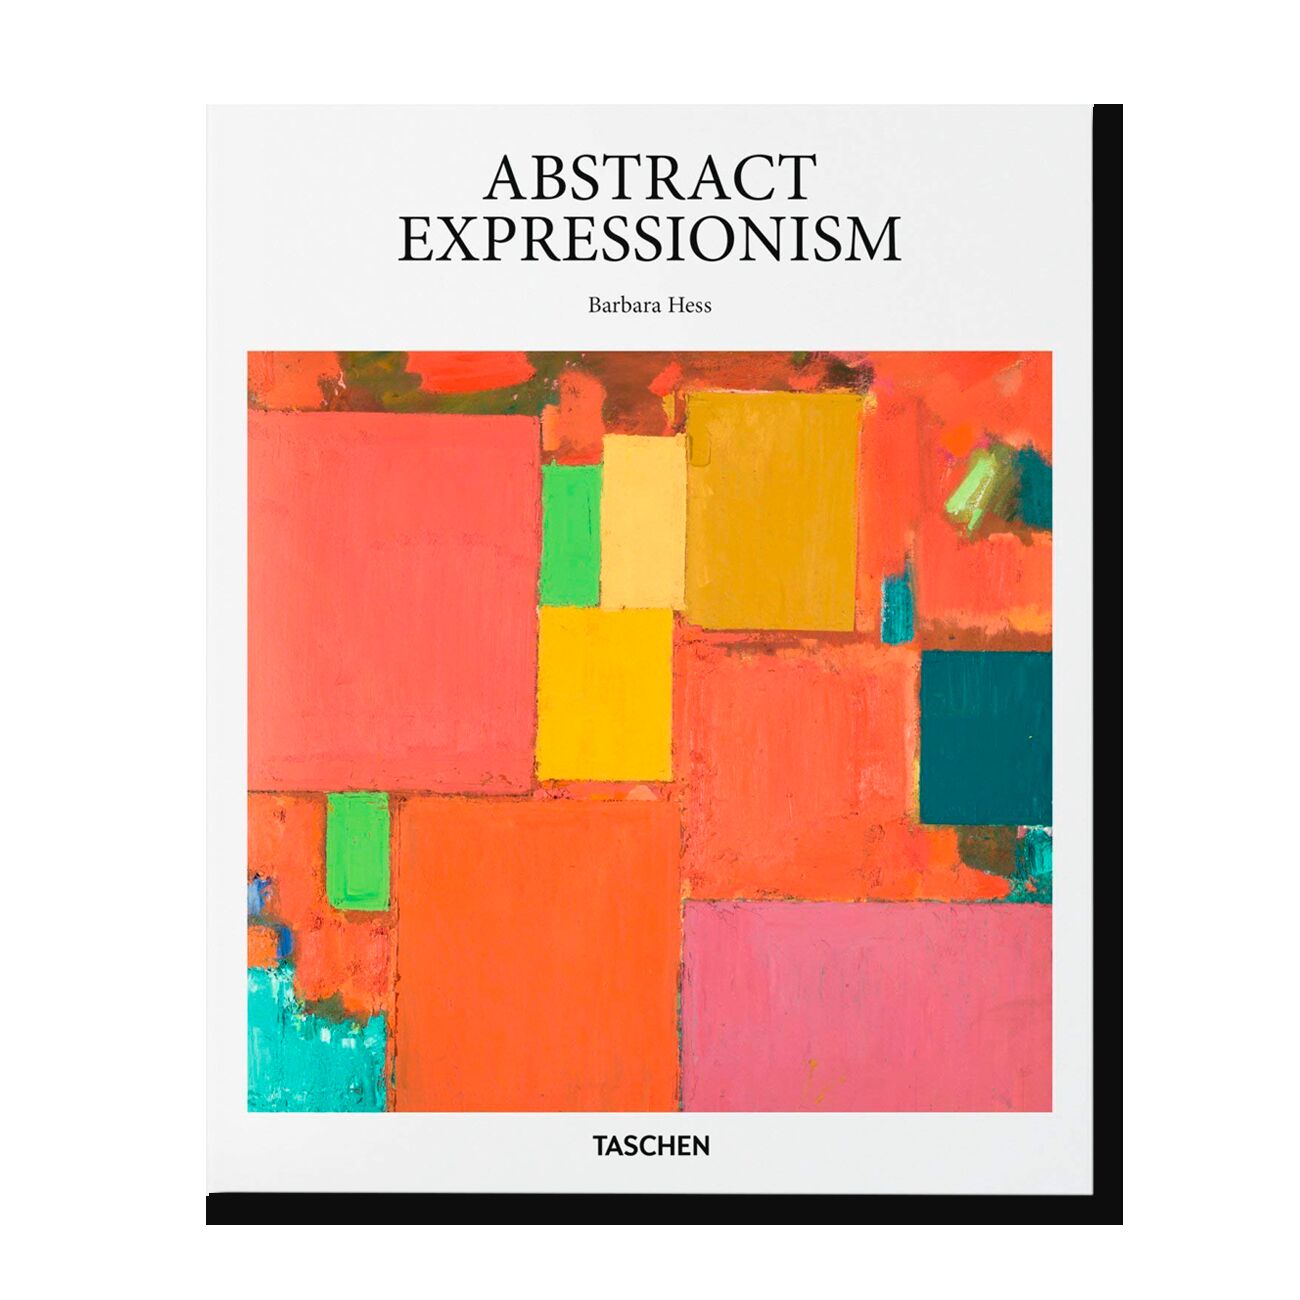 Abstract Expressionism (Basic Art Series)